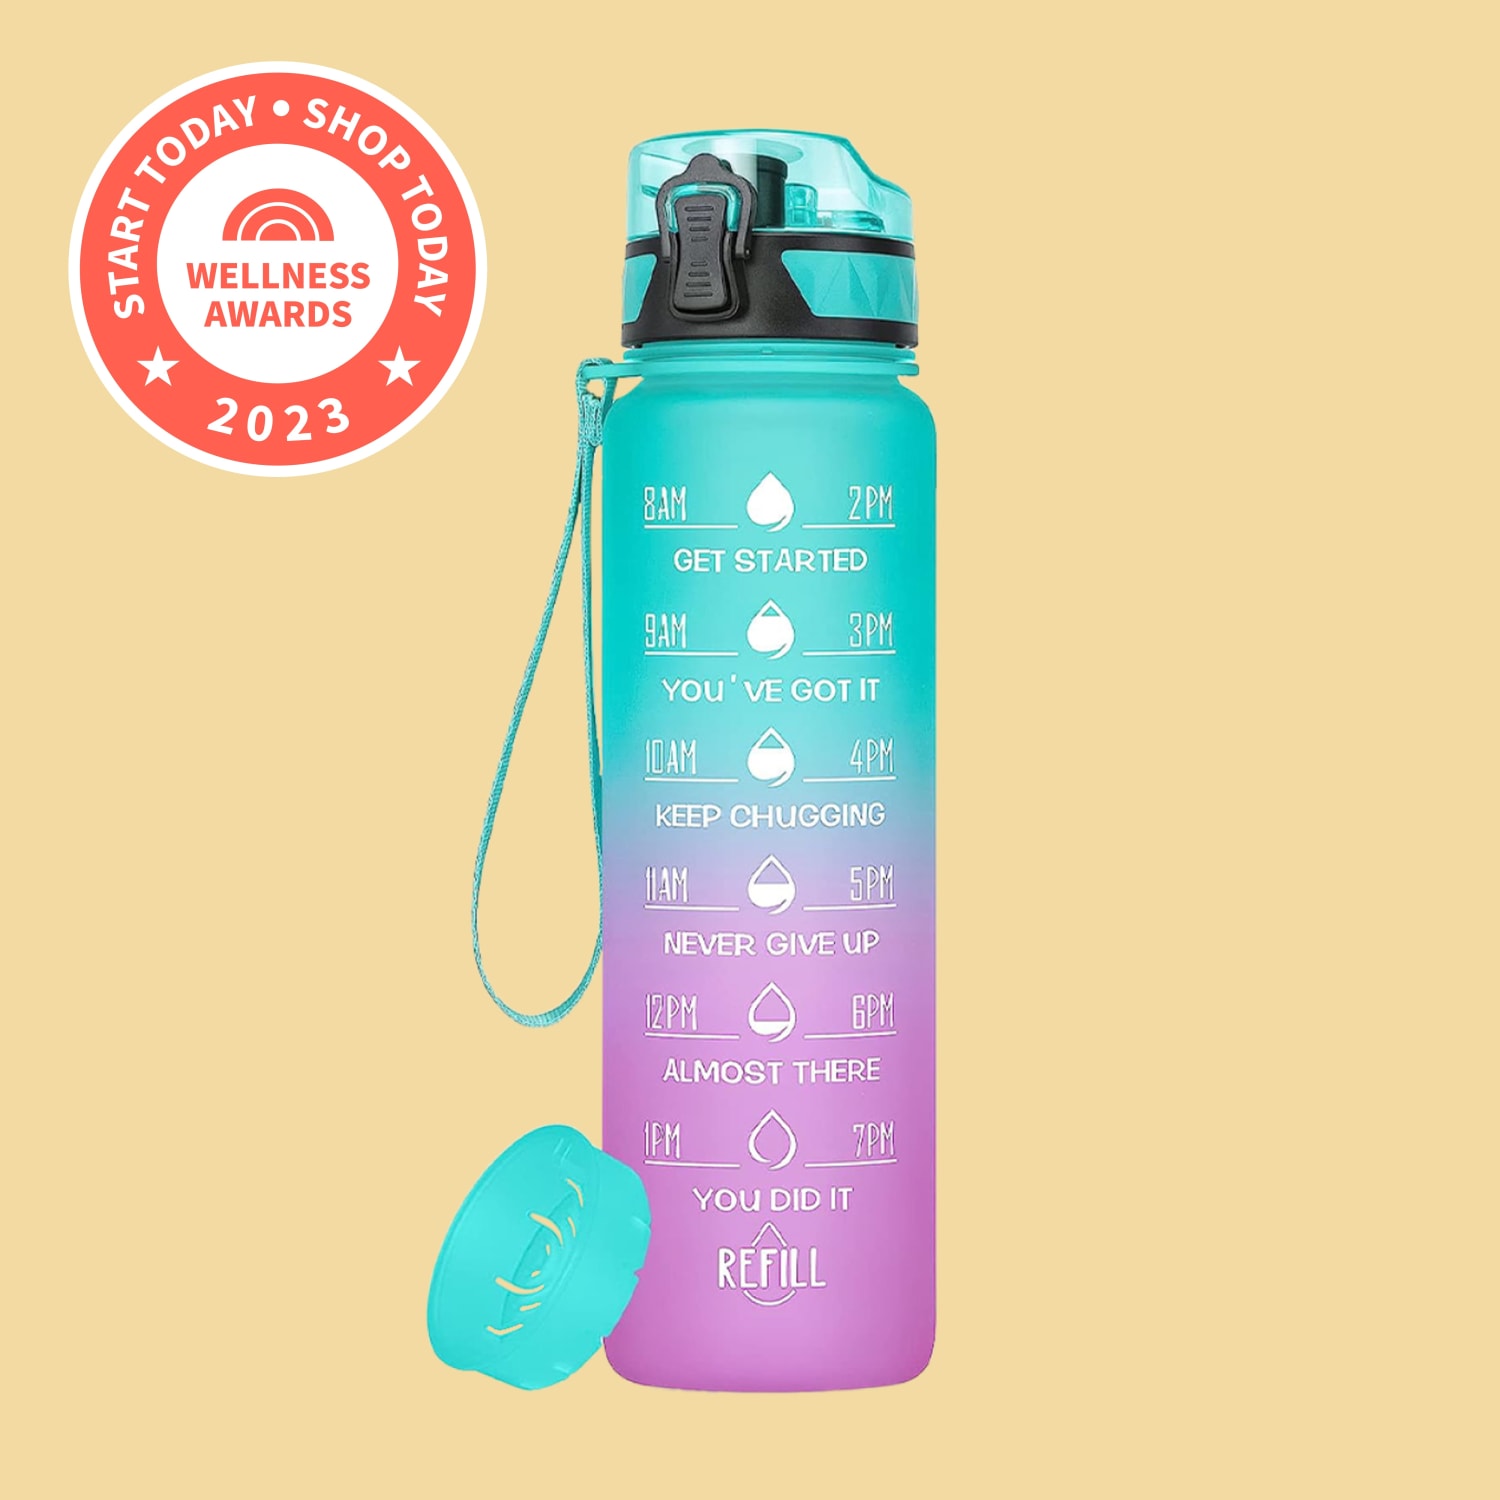 https://media-cldnry.s-nbcnews.com/image/upload/rockcms/2023-08/230824-Wellness-Awards-bd-1x1-Water-Bottle-with-Time-Marker-a30b70.jpg